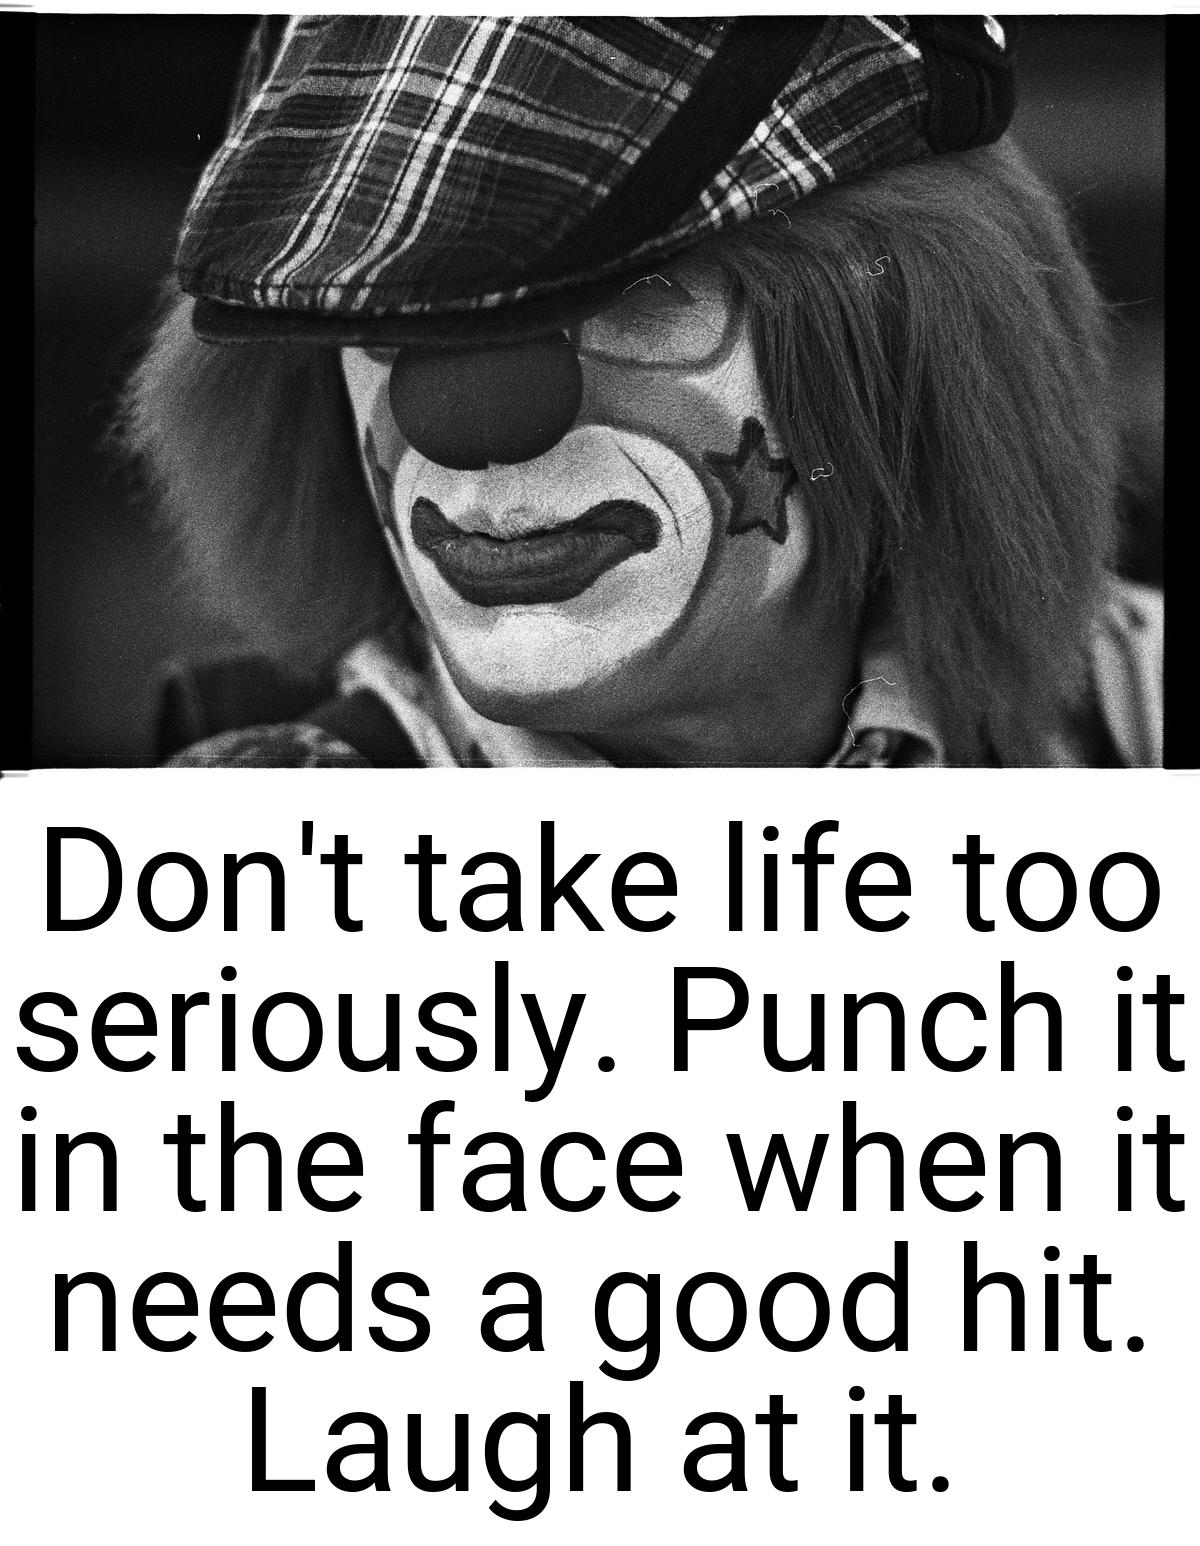 Don't take life too seriously. Punch it in the face when it